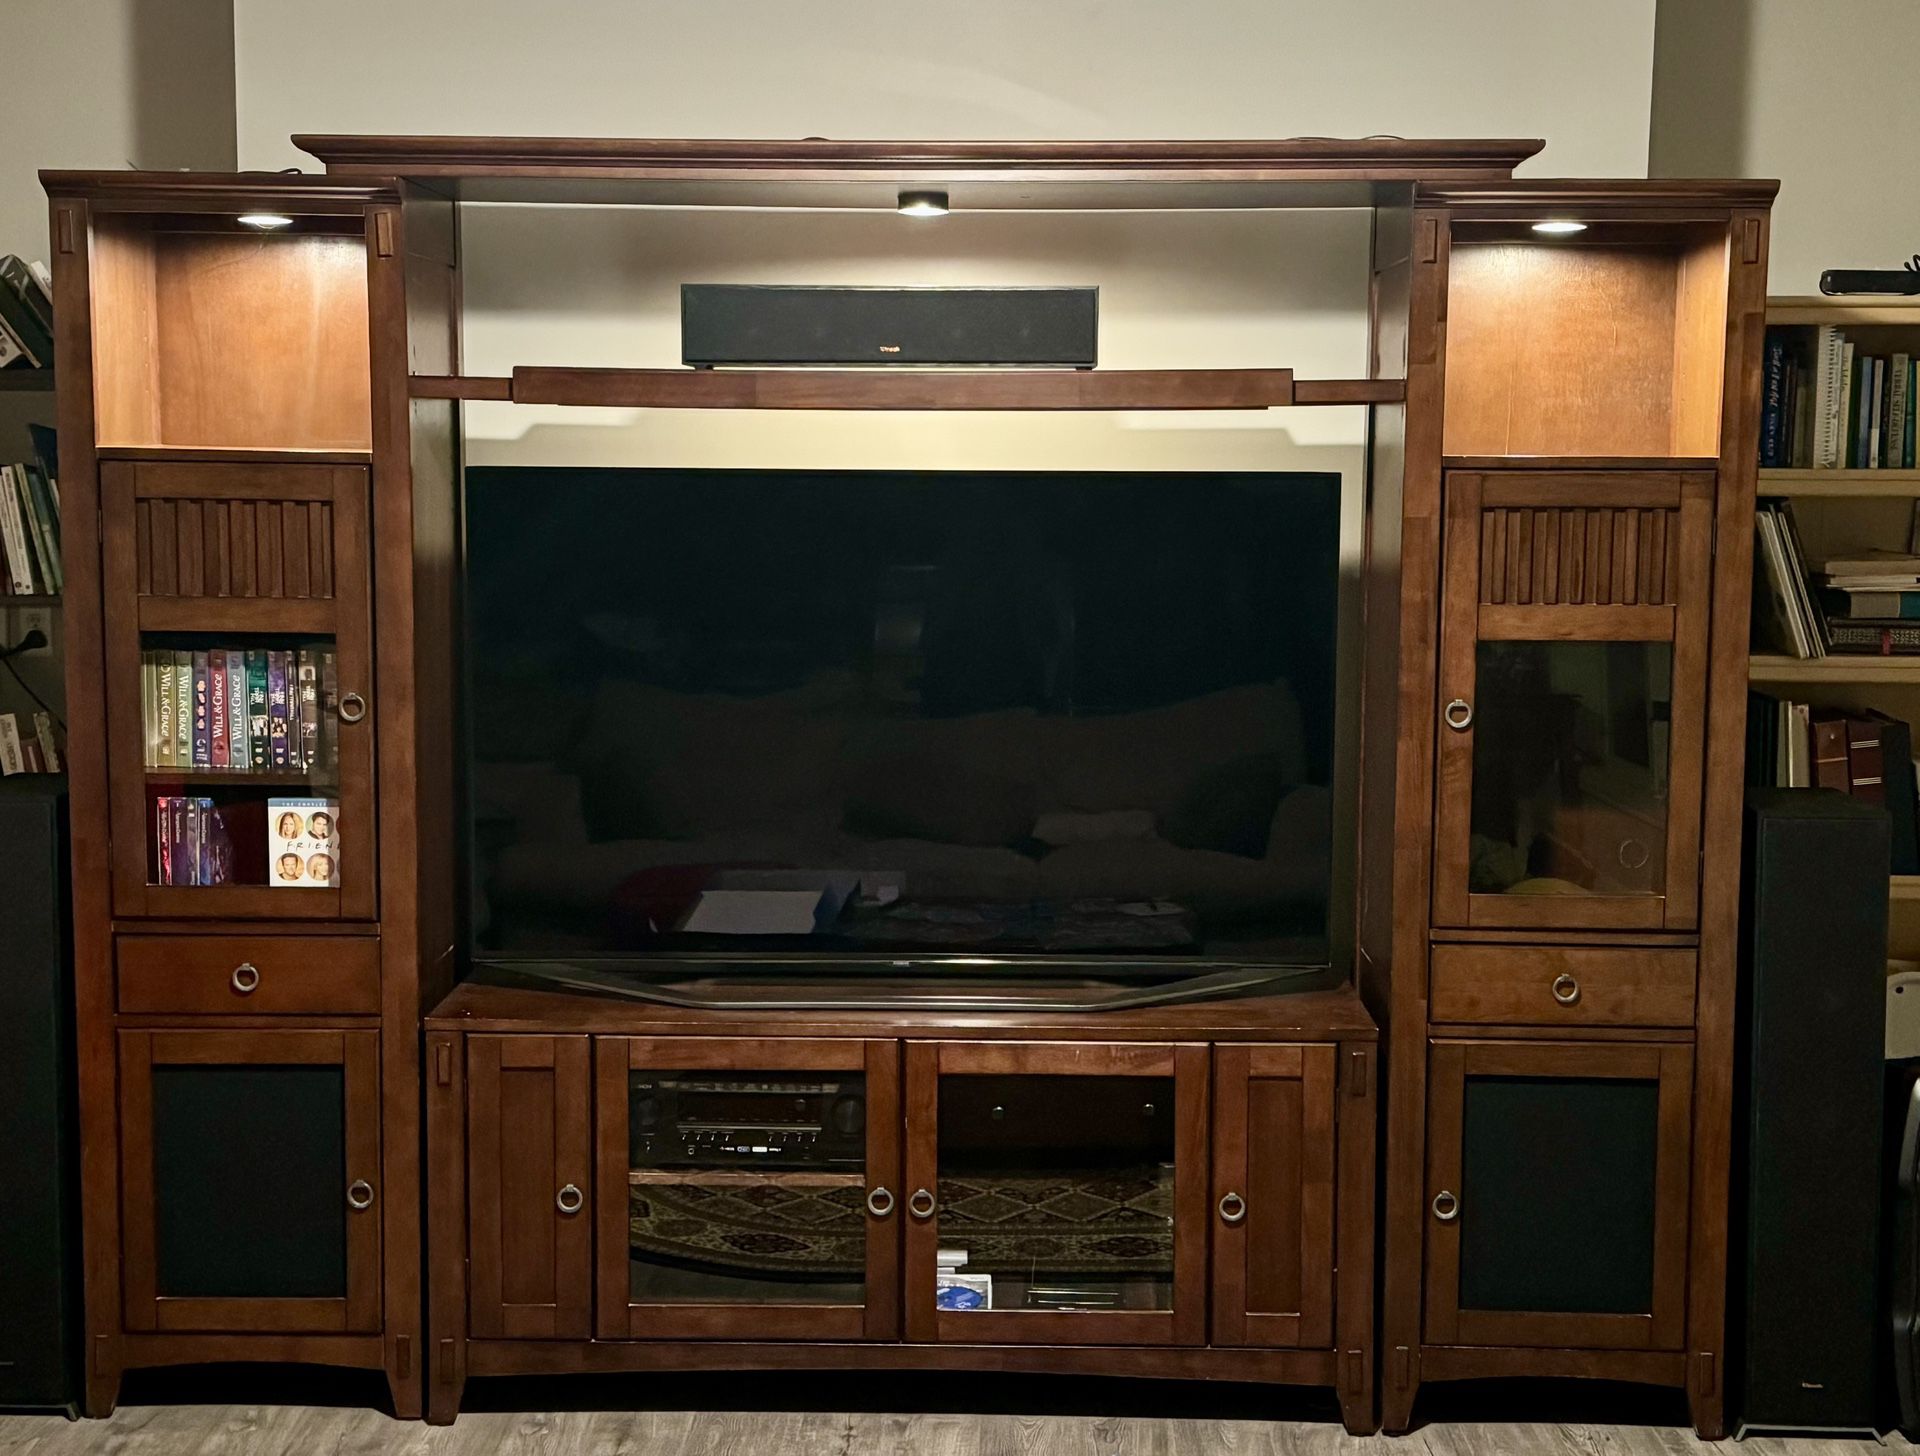 TOV Furniture Virginia Wooden Entertainment Center! Delivery includes $50